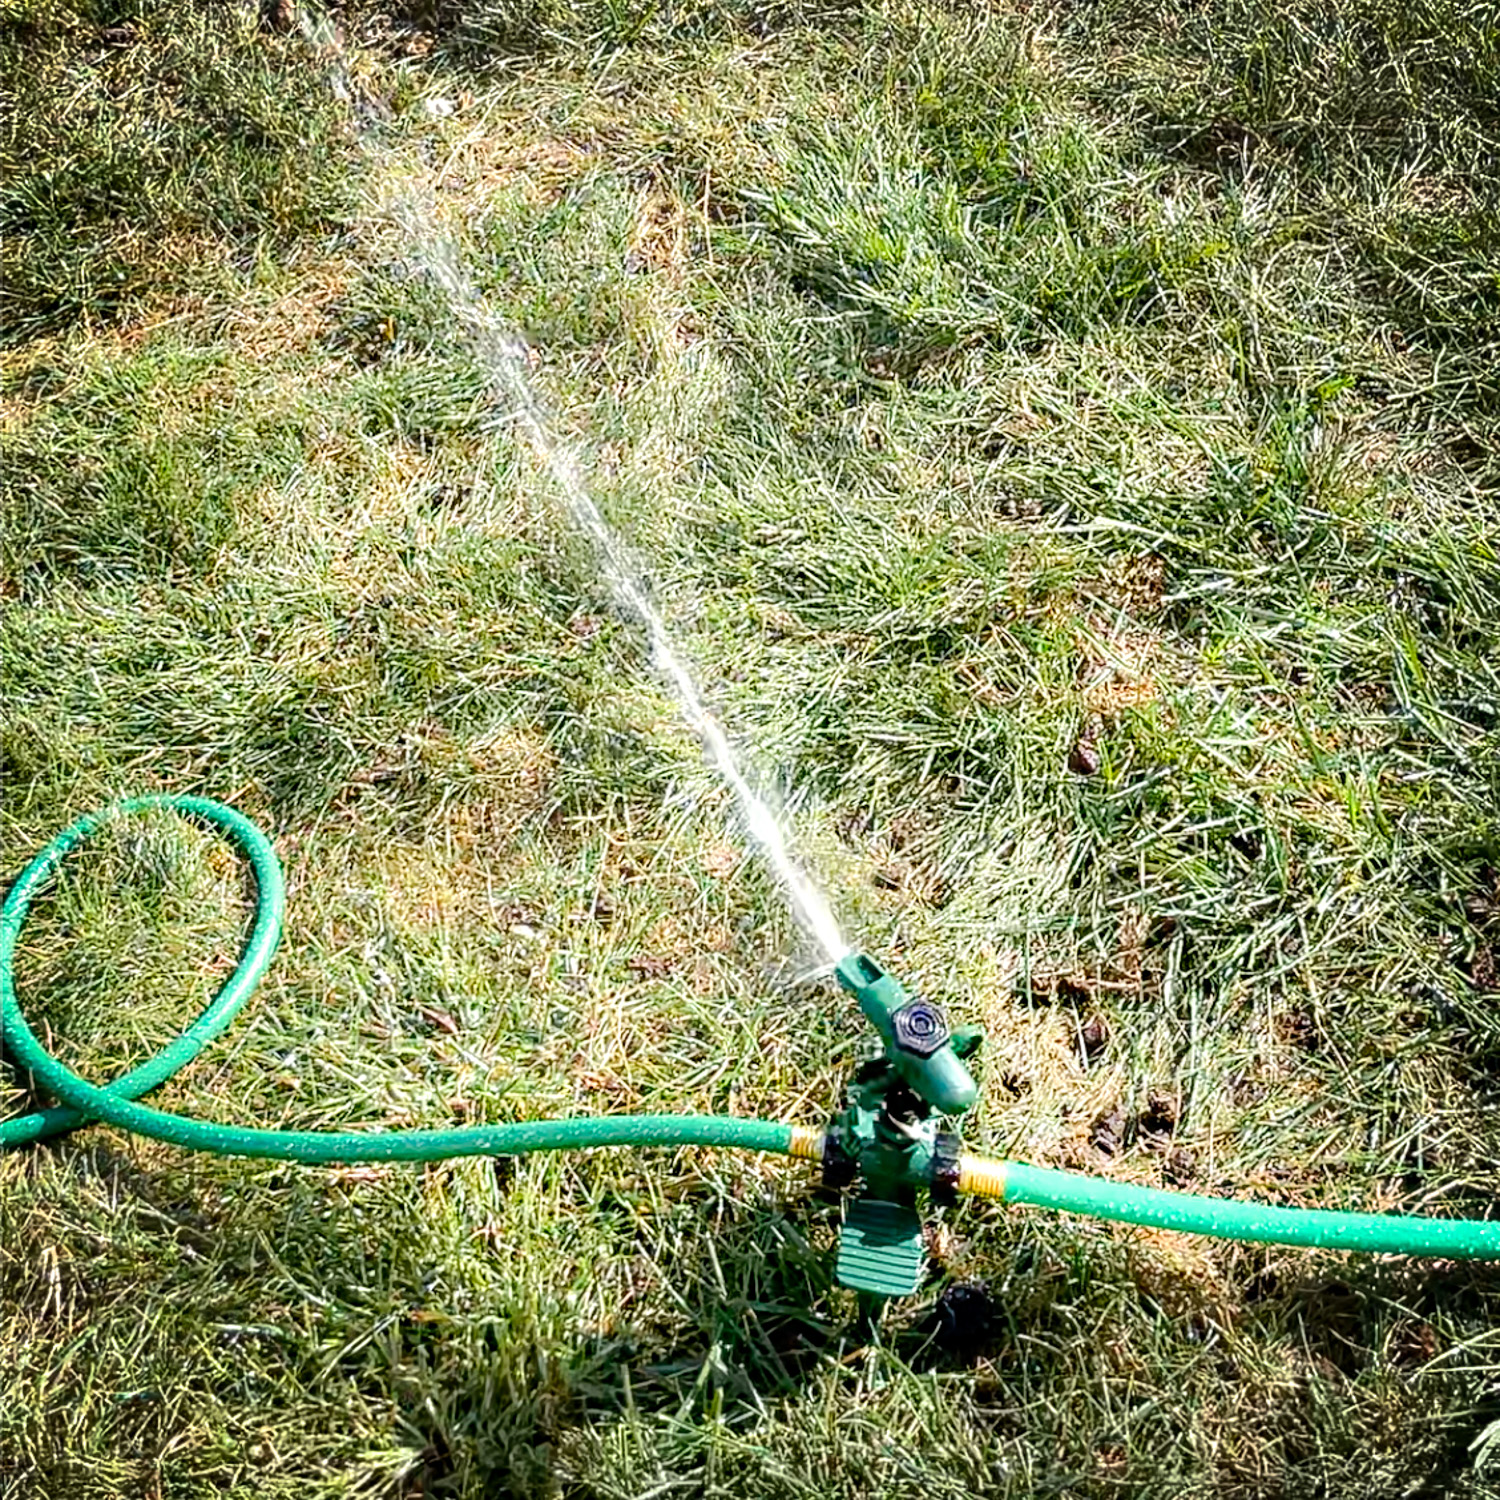 How to set up a DIY automatic watering system.